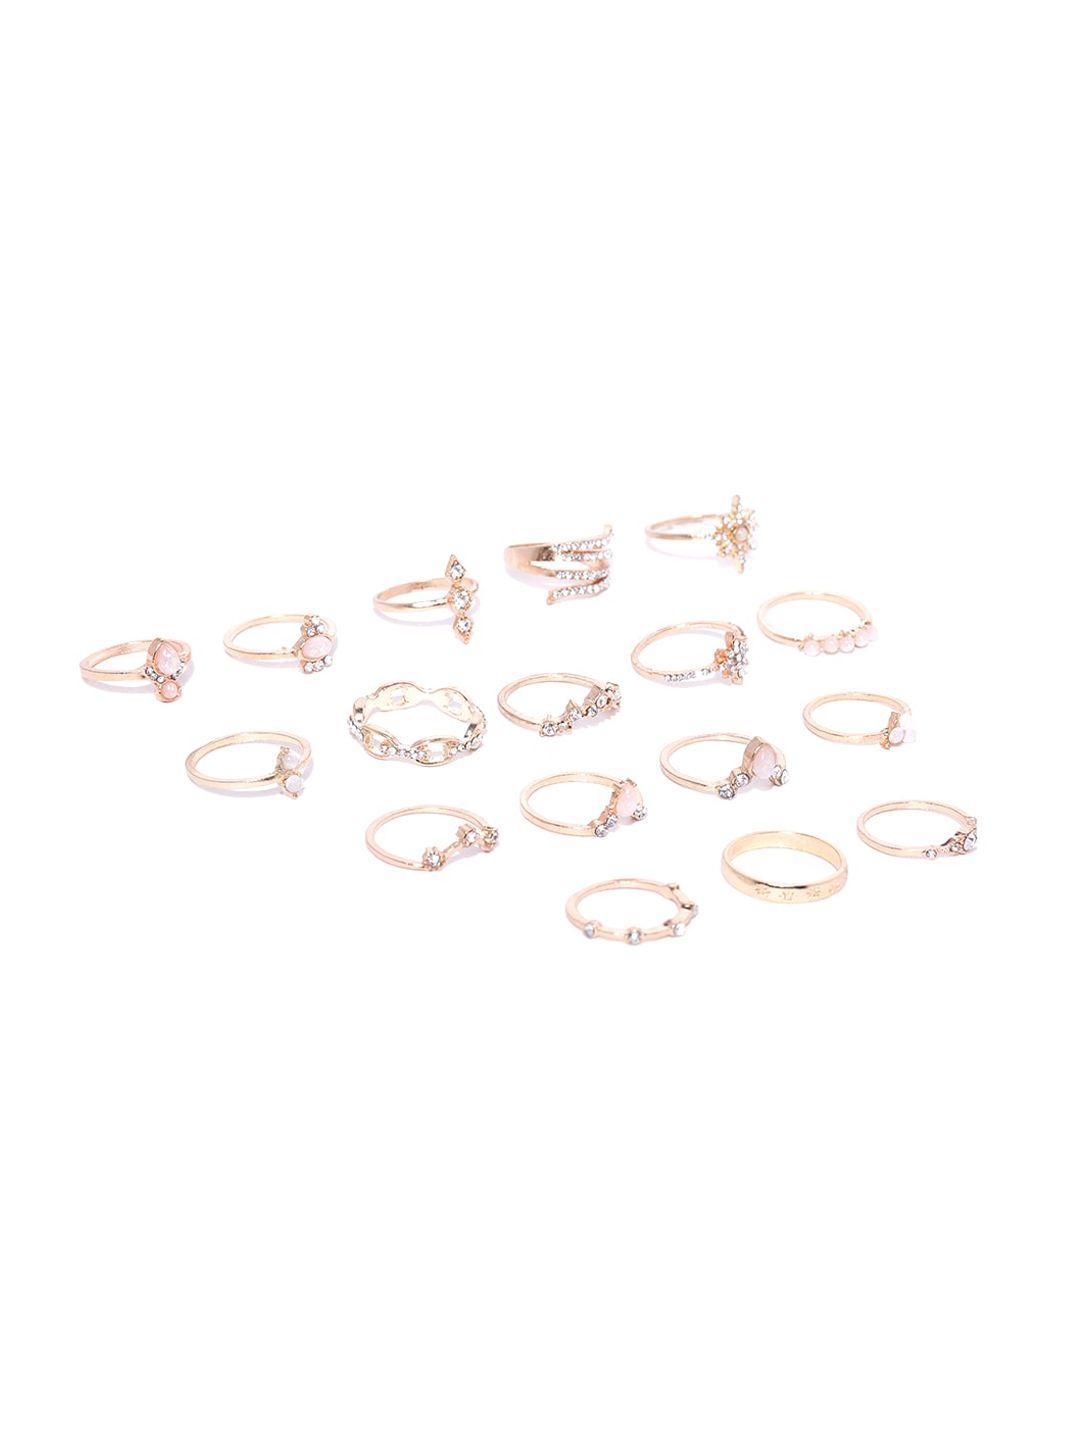 jewels galaxy set of 17 rose gold-plated stone-studded finger rings